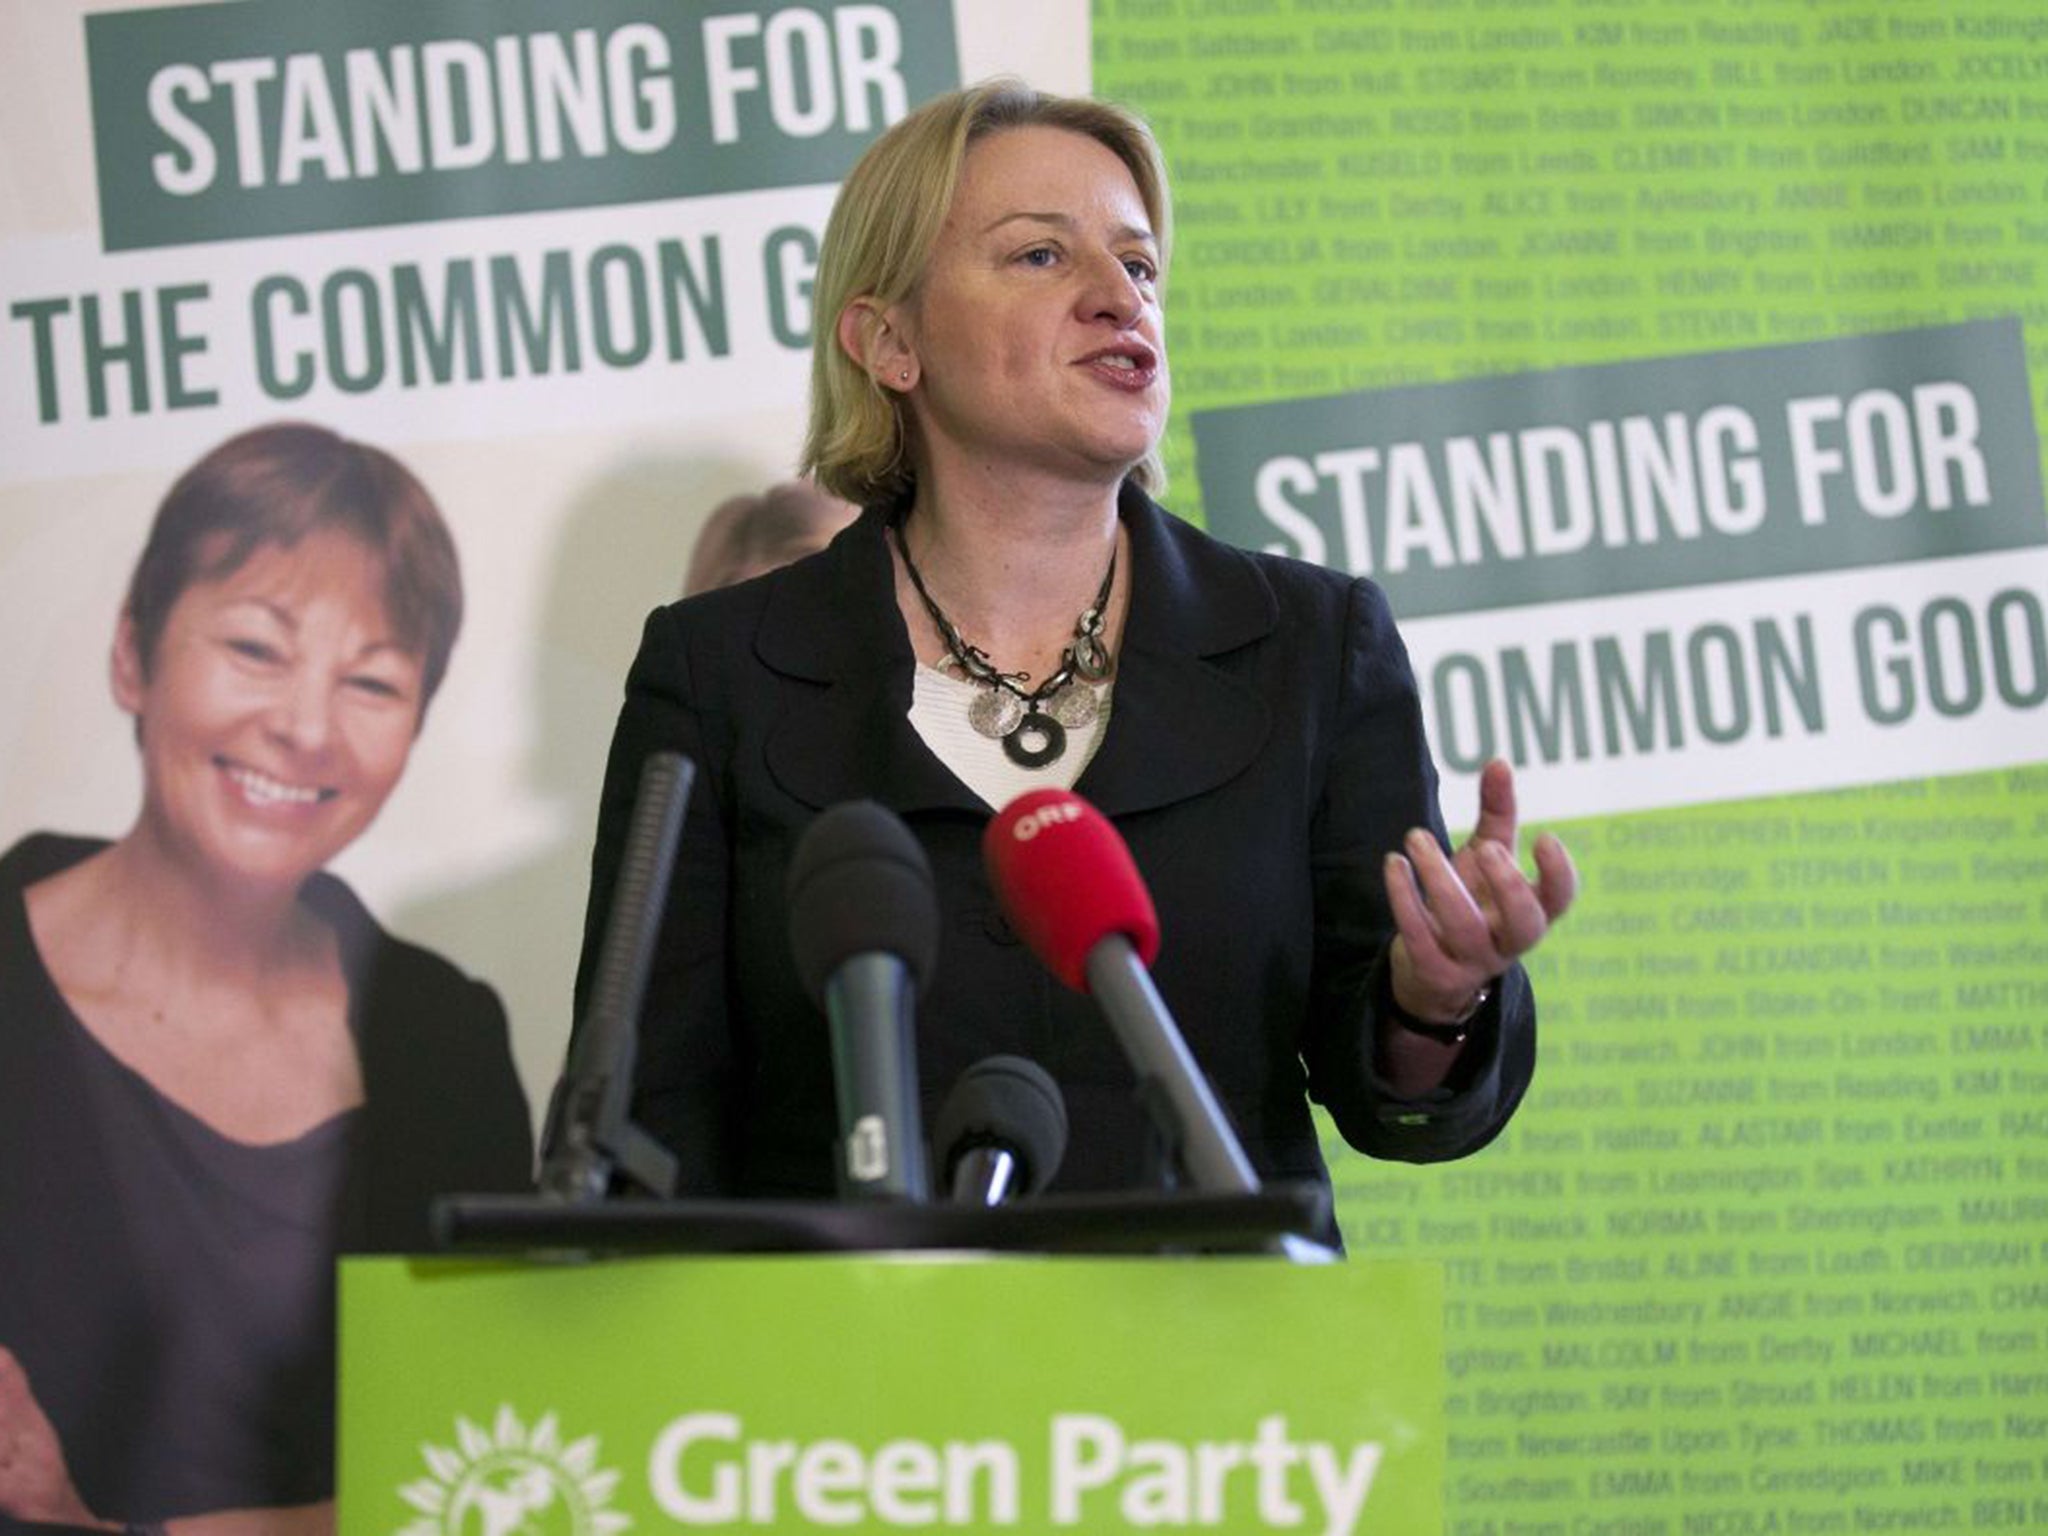 Austrialian-born Natalie Bennett was elected leader of the Green Party in September 2012 